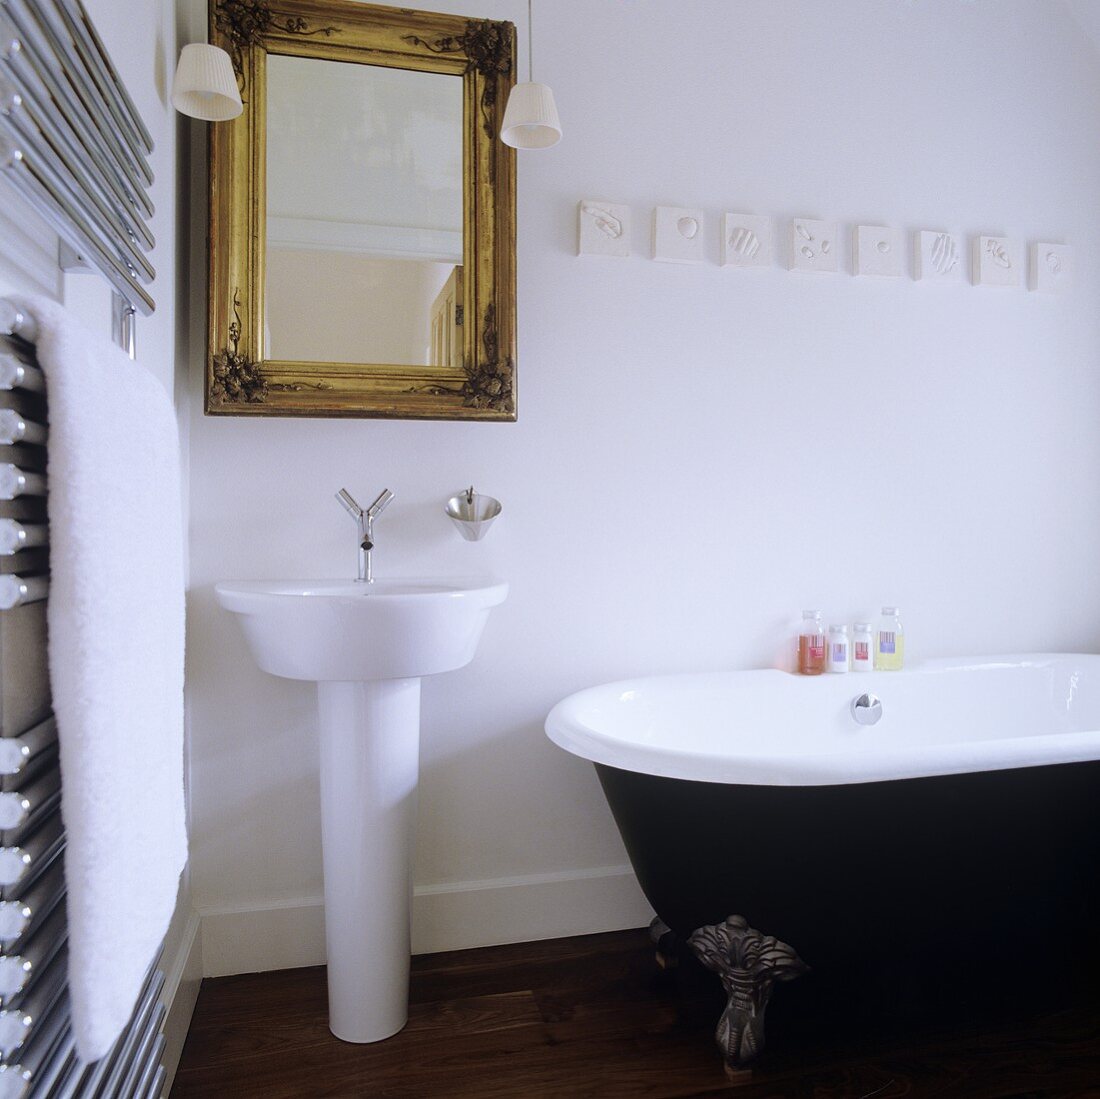 A designer wash basin and a mirror with a gold frame and an antique bathtub with feet in a bathroom